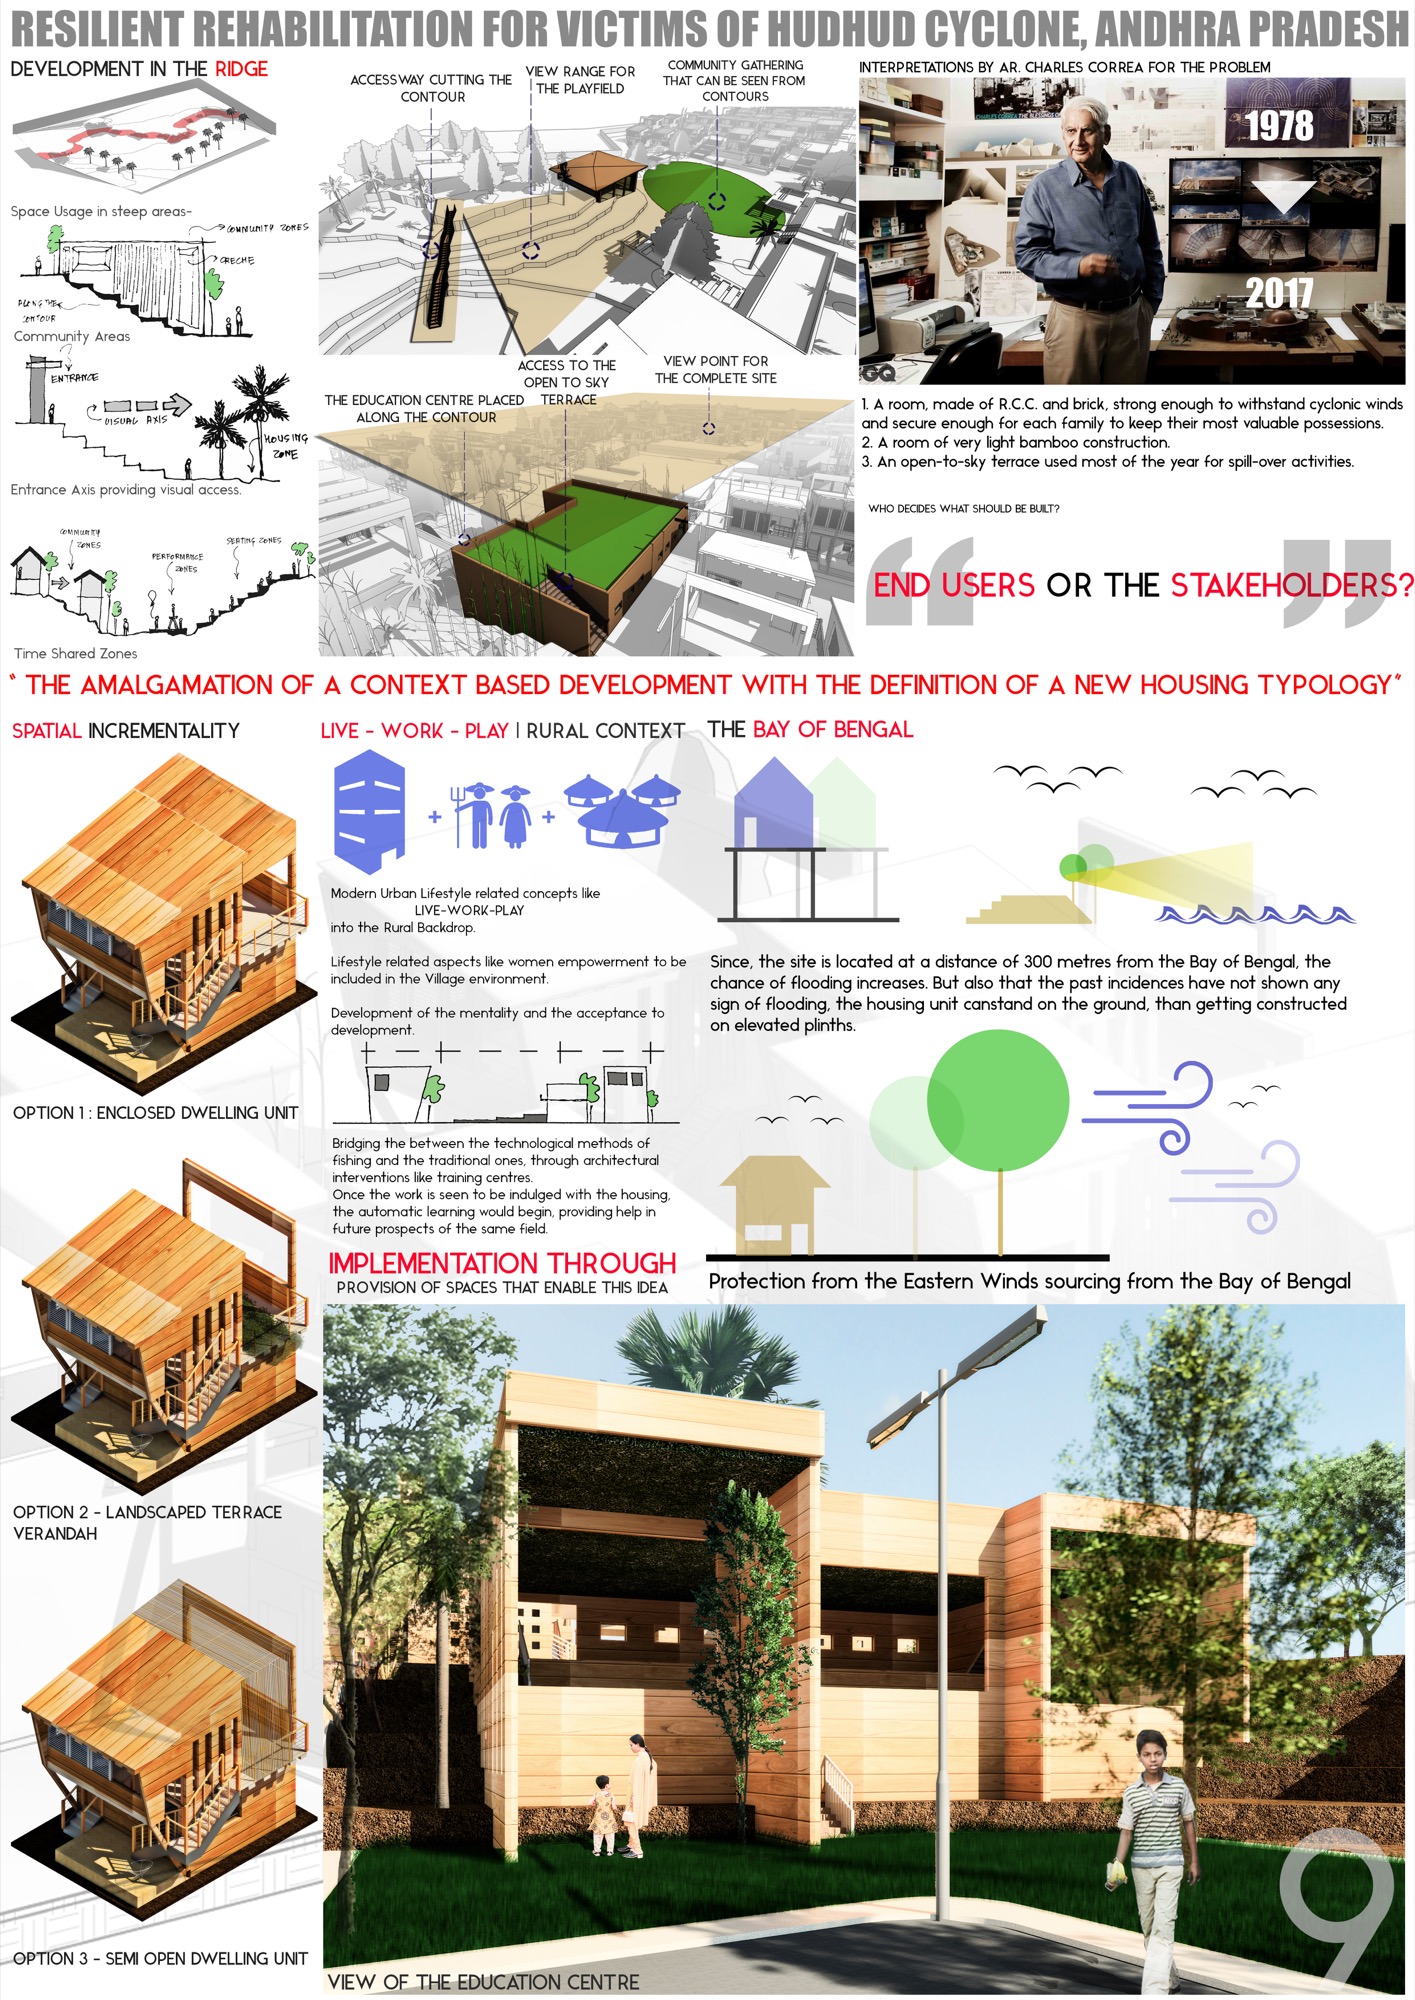 B.Arch Thesis: RESILIENT REHABILITATION FOR VICTIMS OF HUDHUD CYCLONE, ANDHRA PRADESH, by Sanand Telang 19